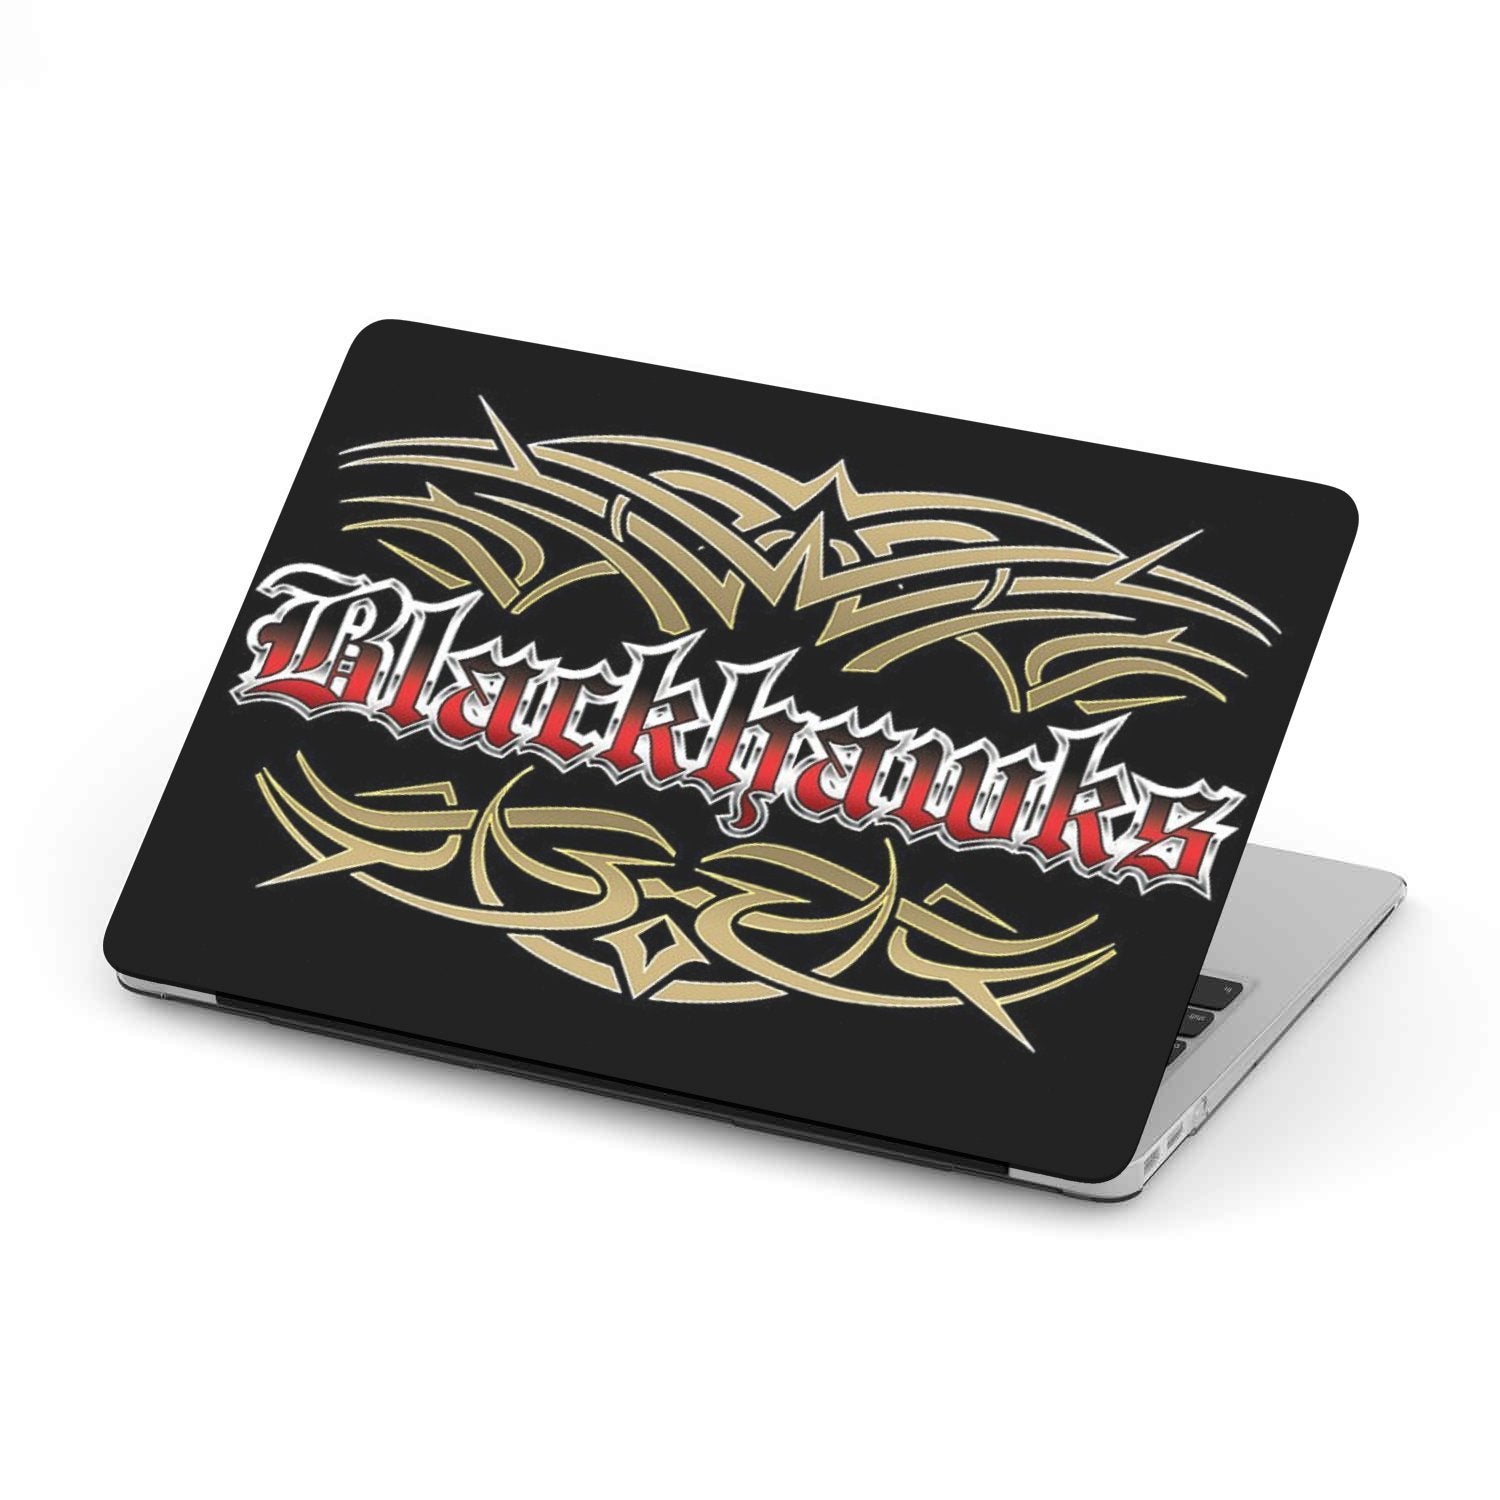 Blackhawks Team Custom MacBook Case by Woody Signs Co. - Handmade Crafted Unique Wooden Creative